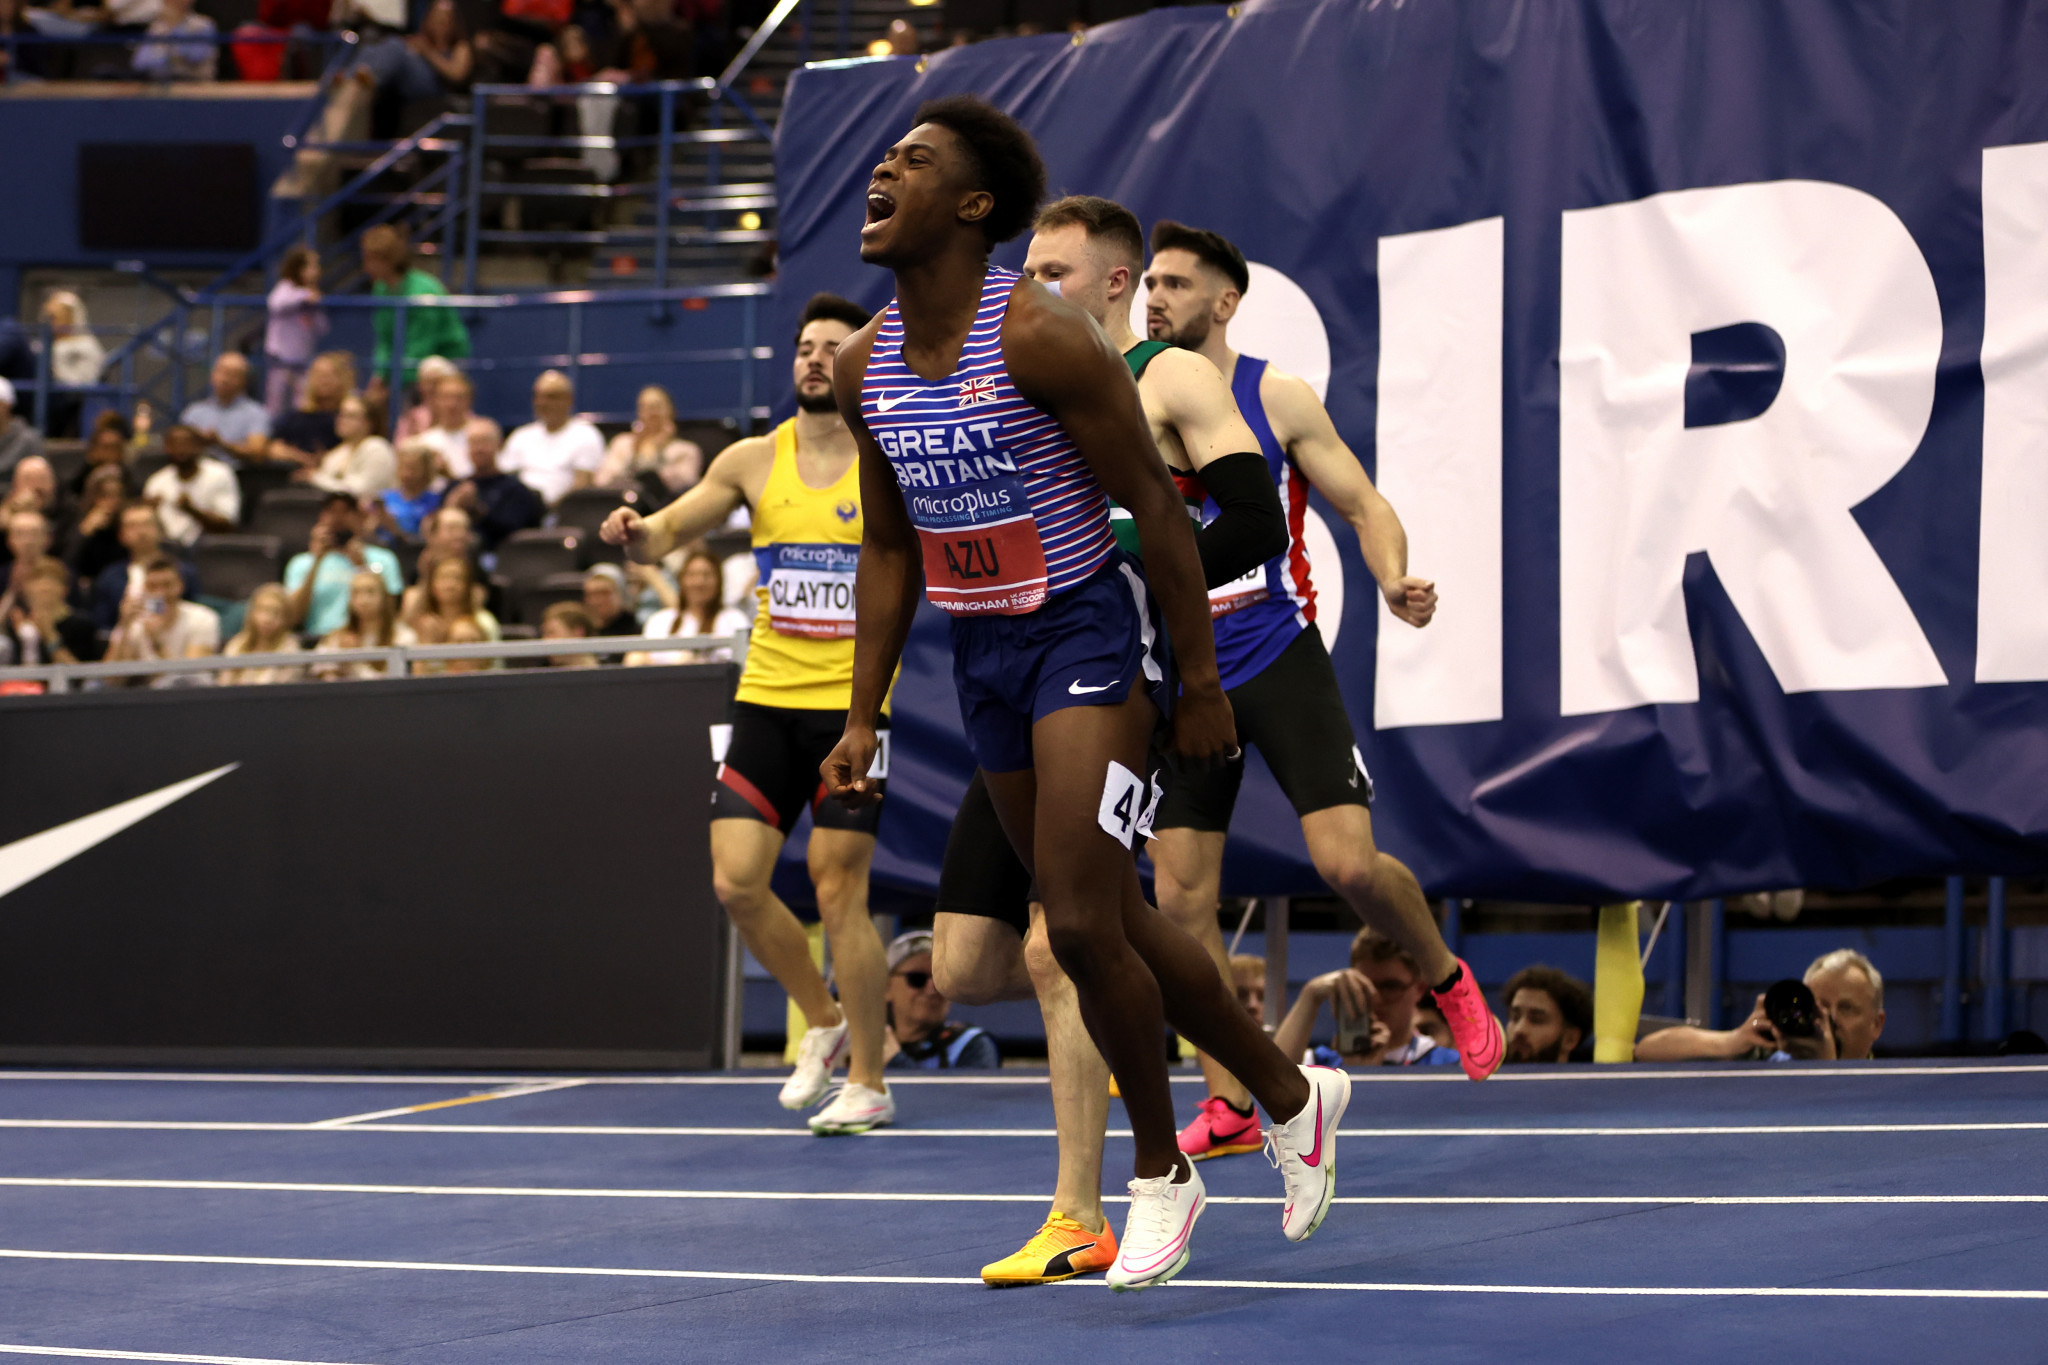 Jeremiah Azu is eyeing the British record and breaking the 10-second barrier at the True Athletes Classic. GETTY IMAGES